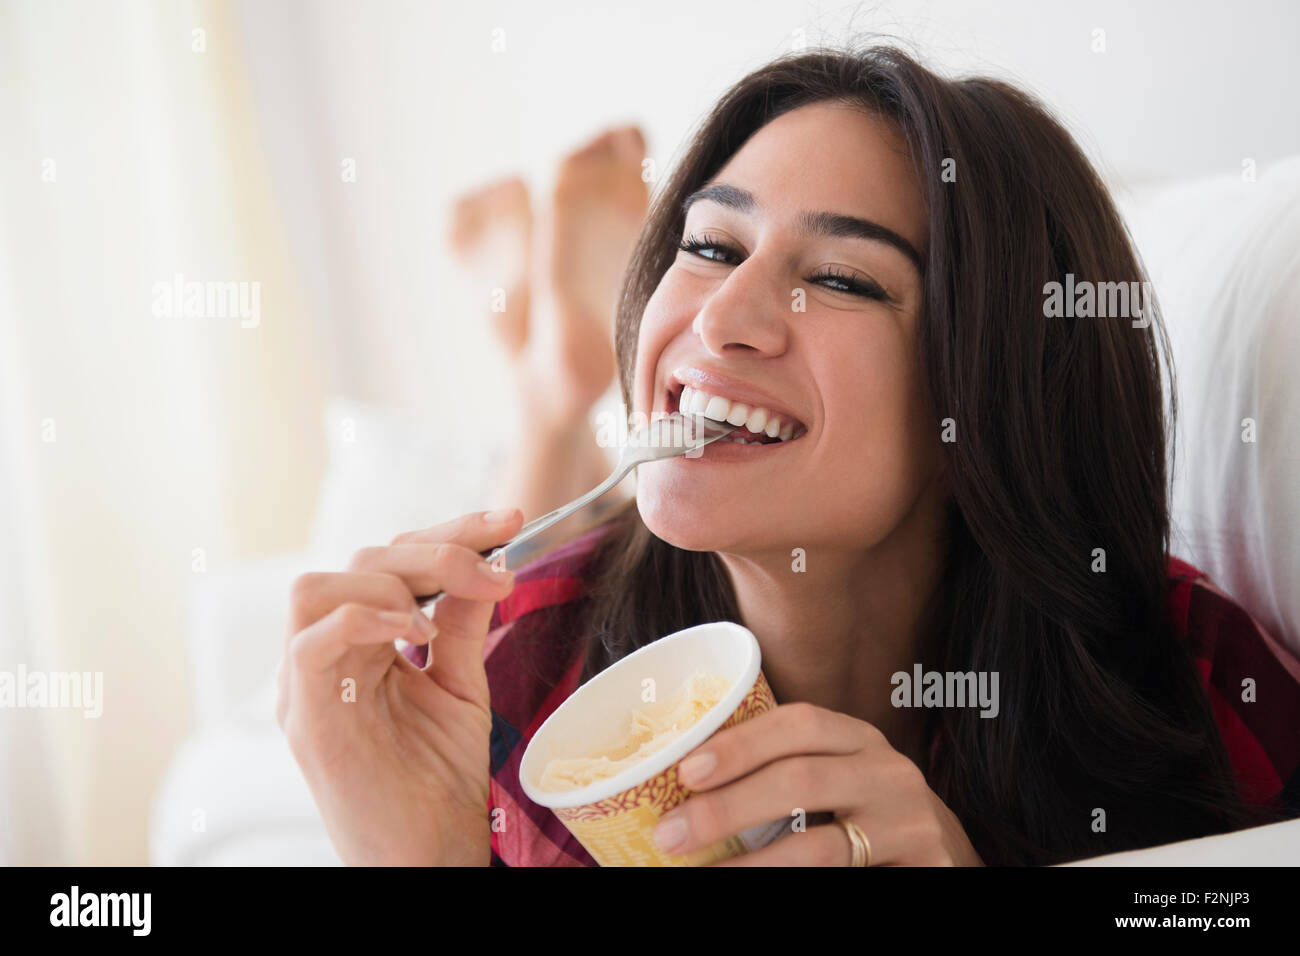 Close up of woman eating ice cream on sofa Stock Photo